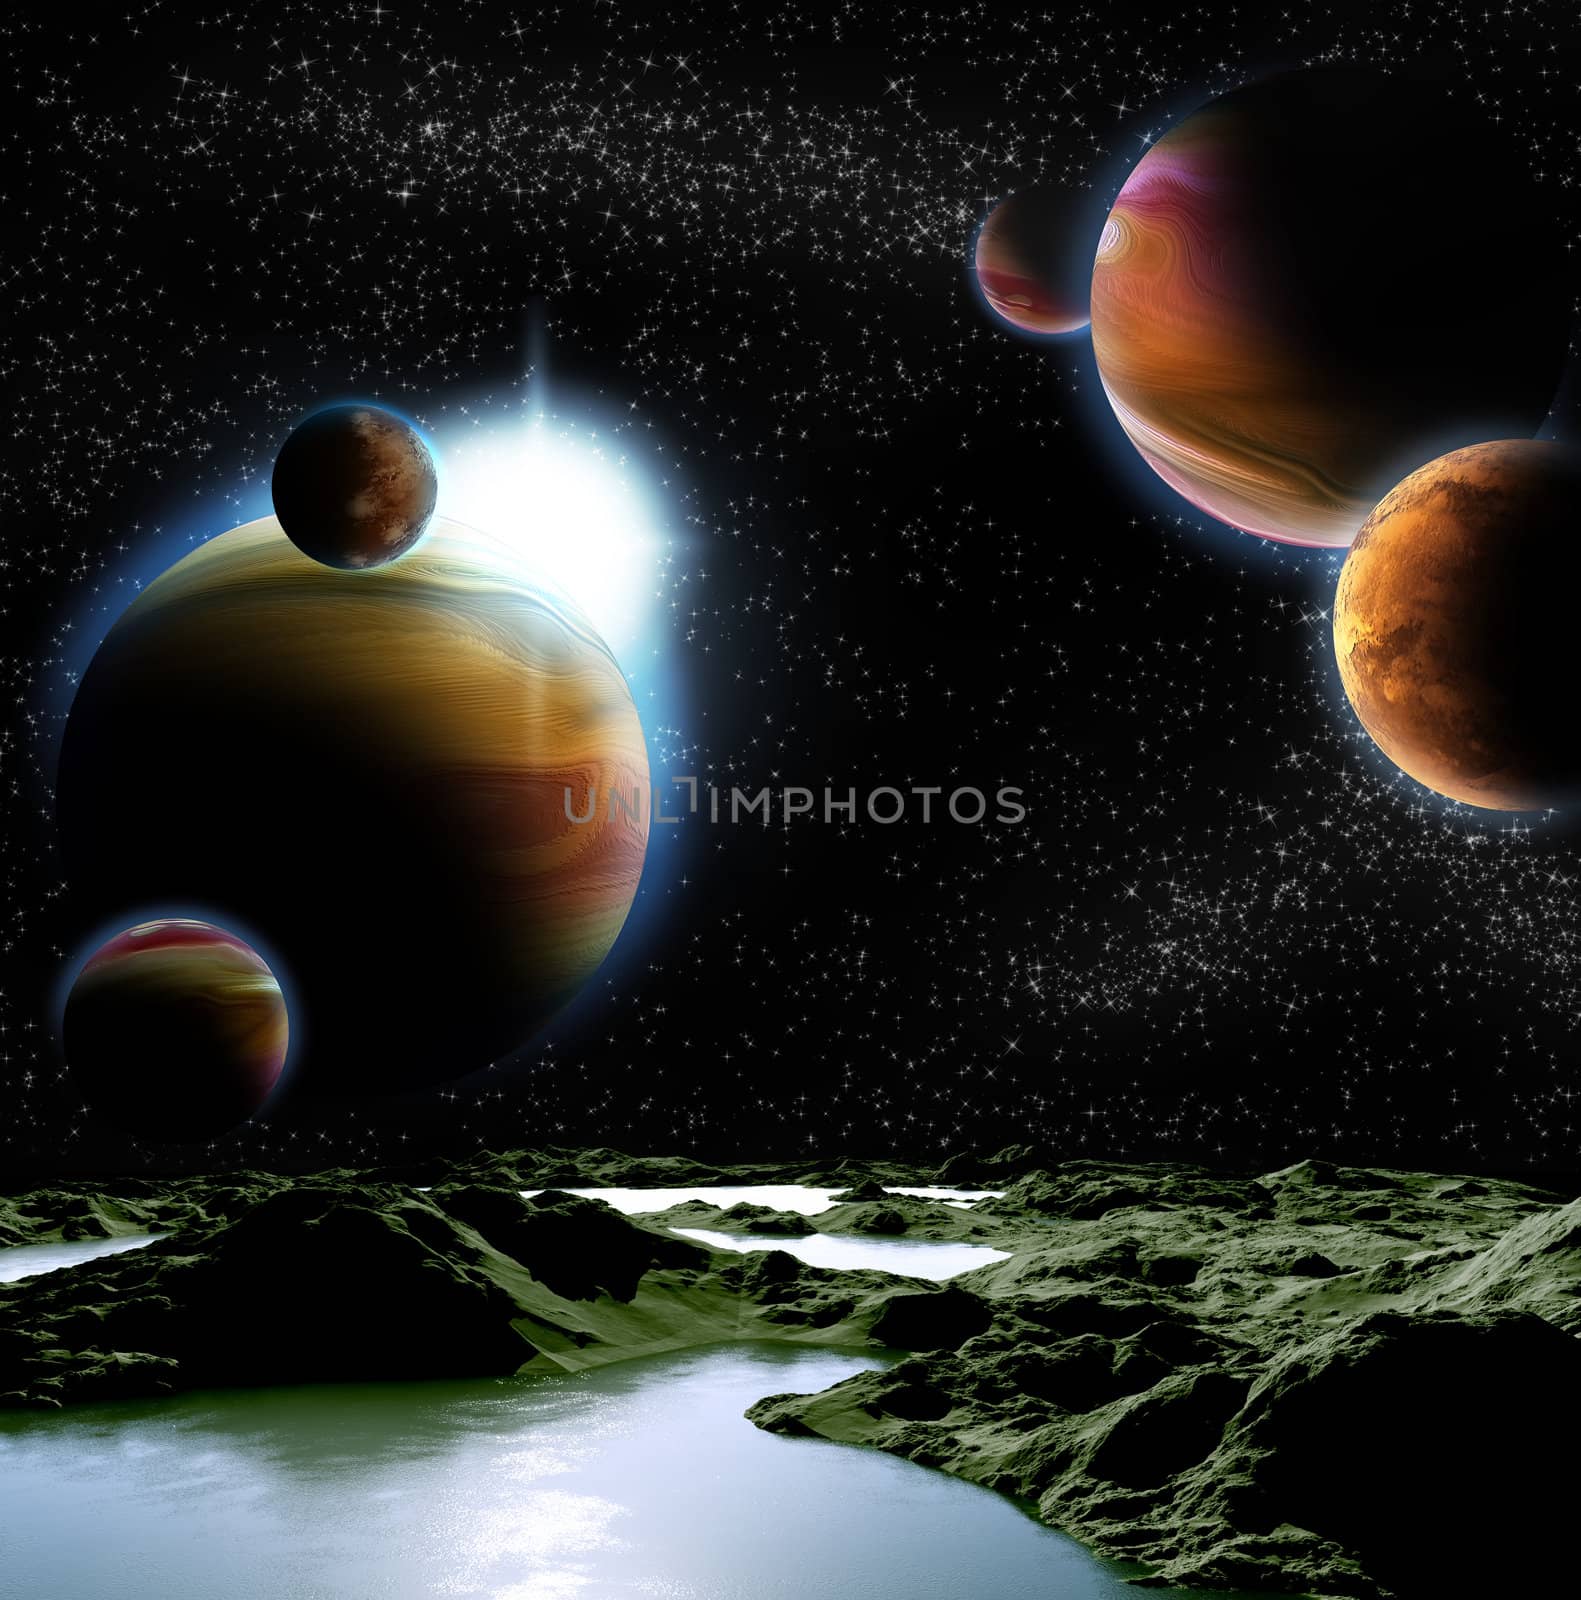 Abstract image of a planet with water. Find new sources and tech by mozzyb